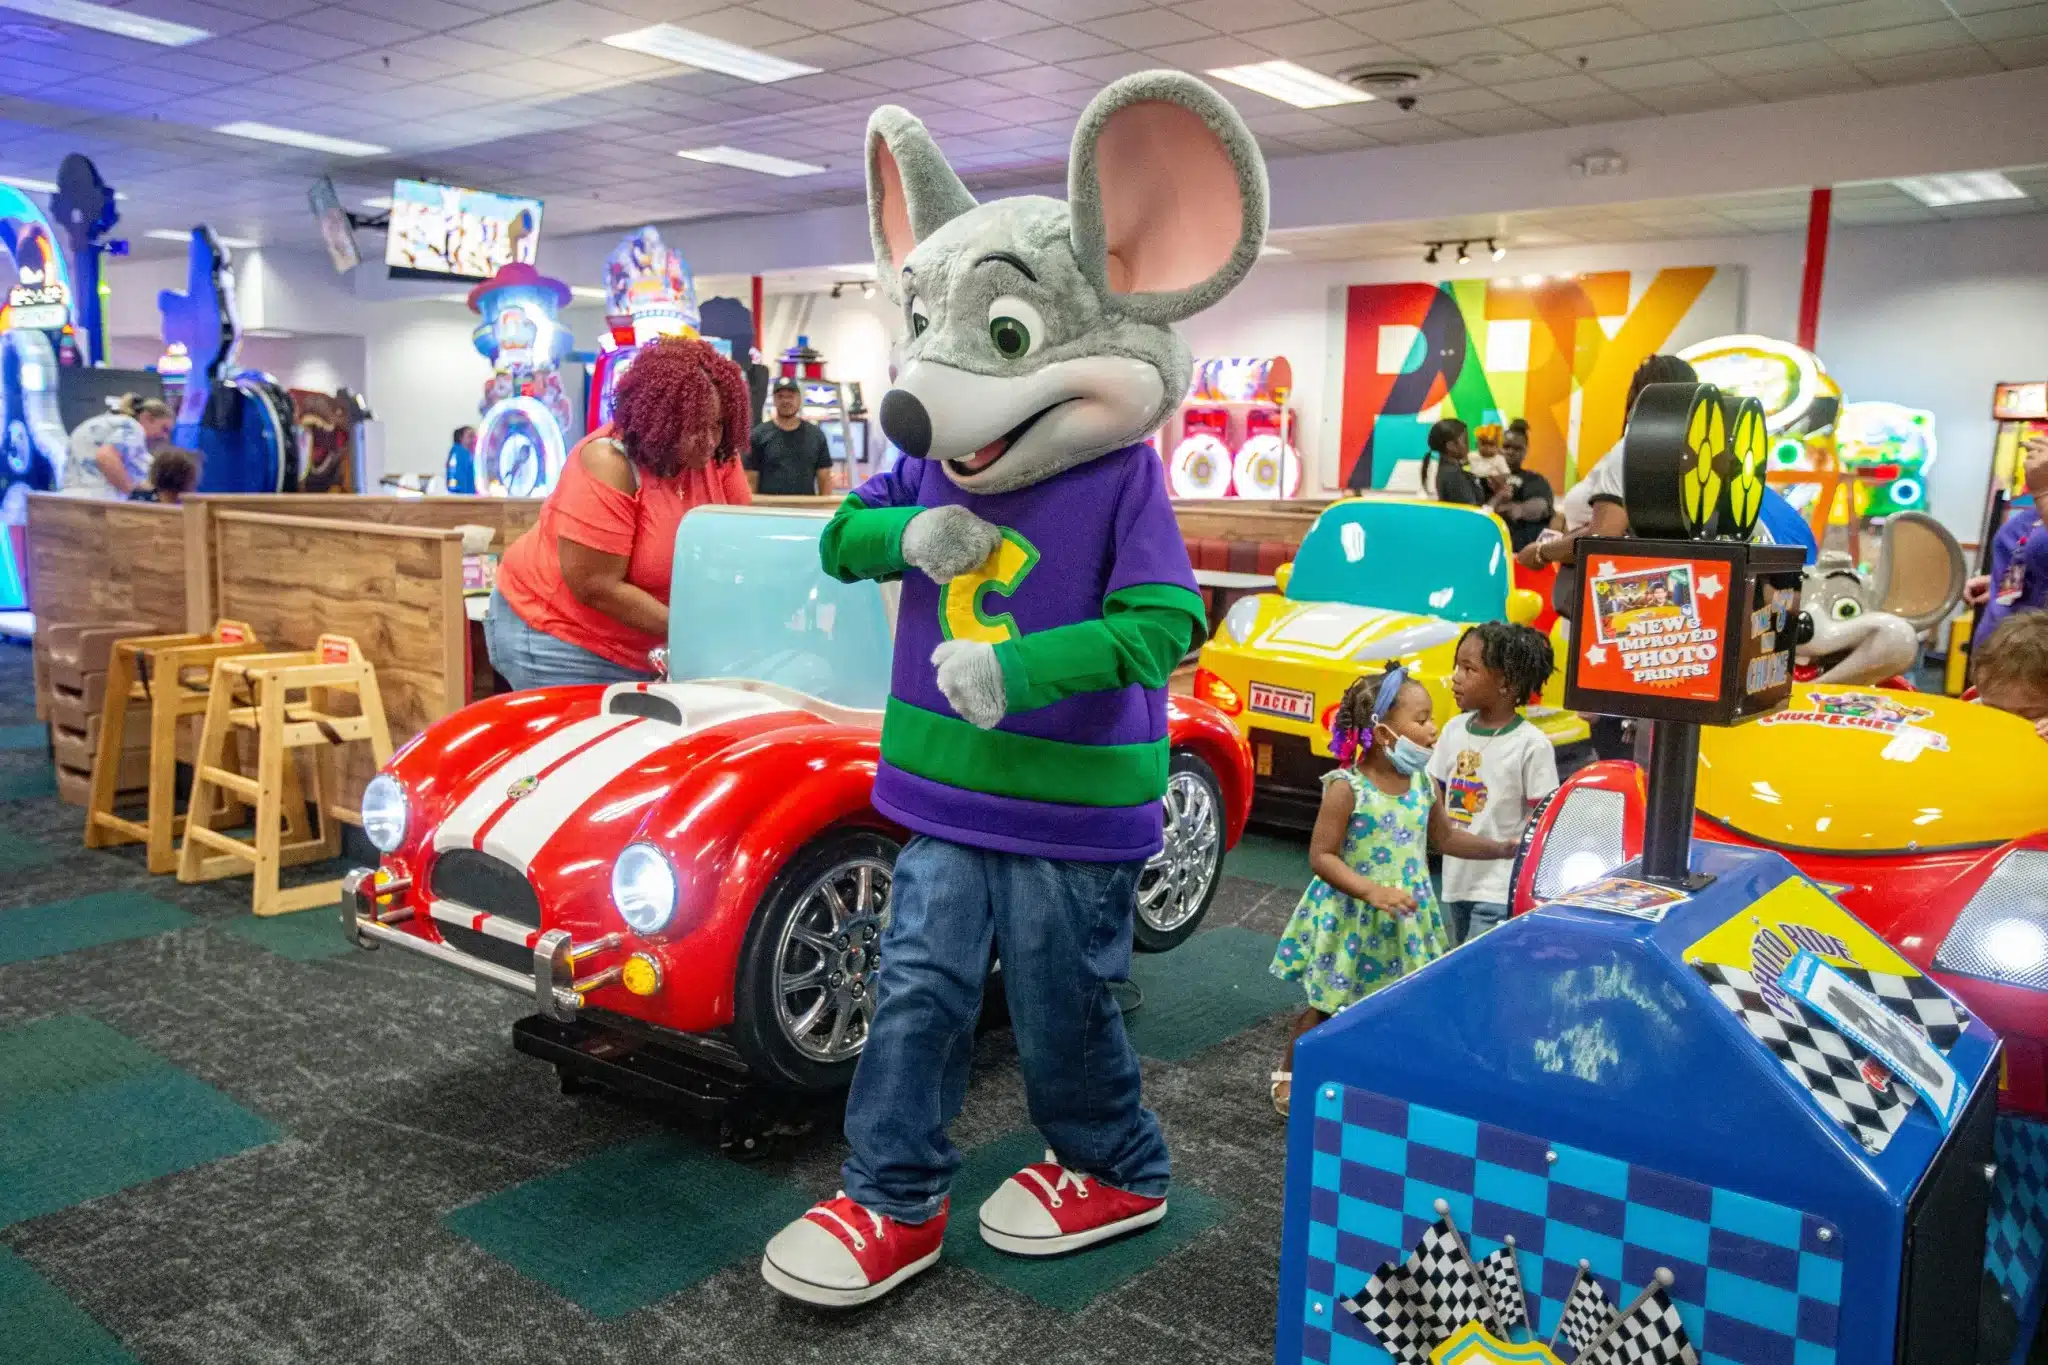 Mouse in car with toy car in background at Chuck-E-Cheese: The Game Time